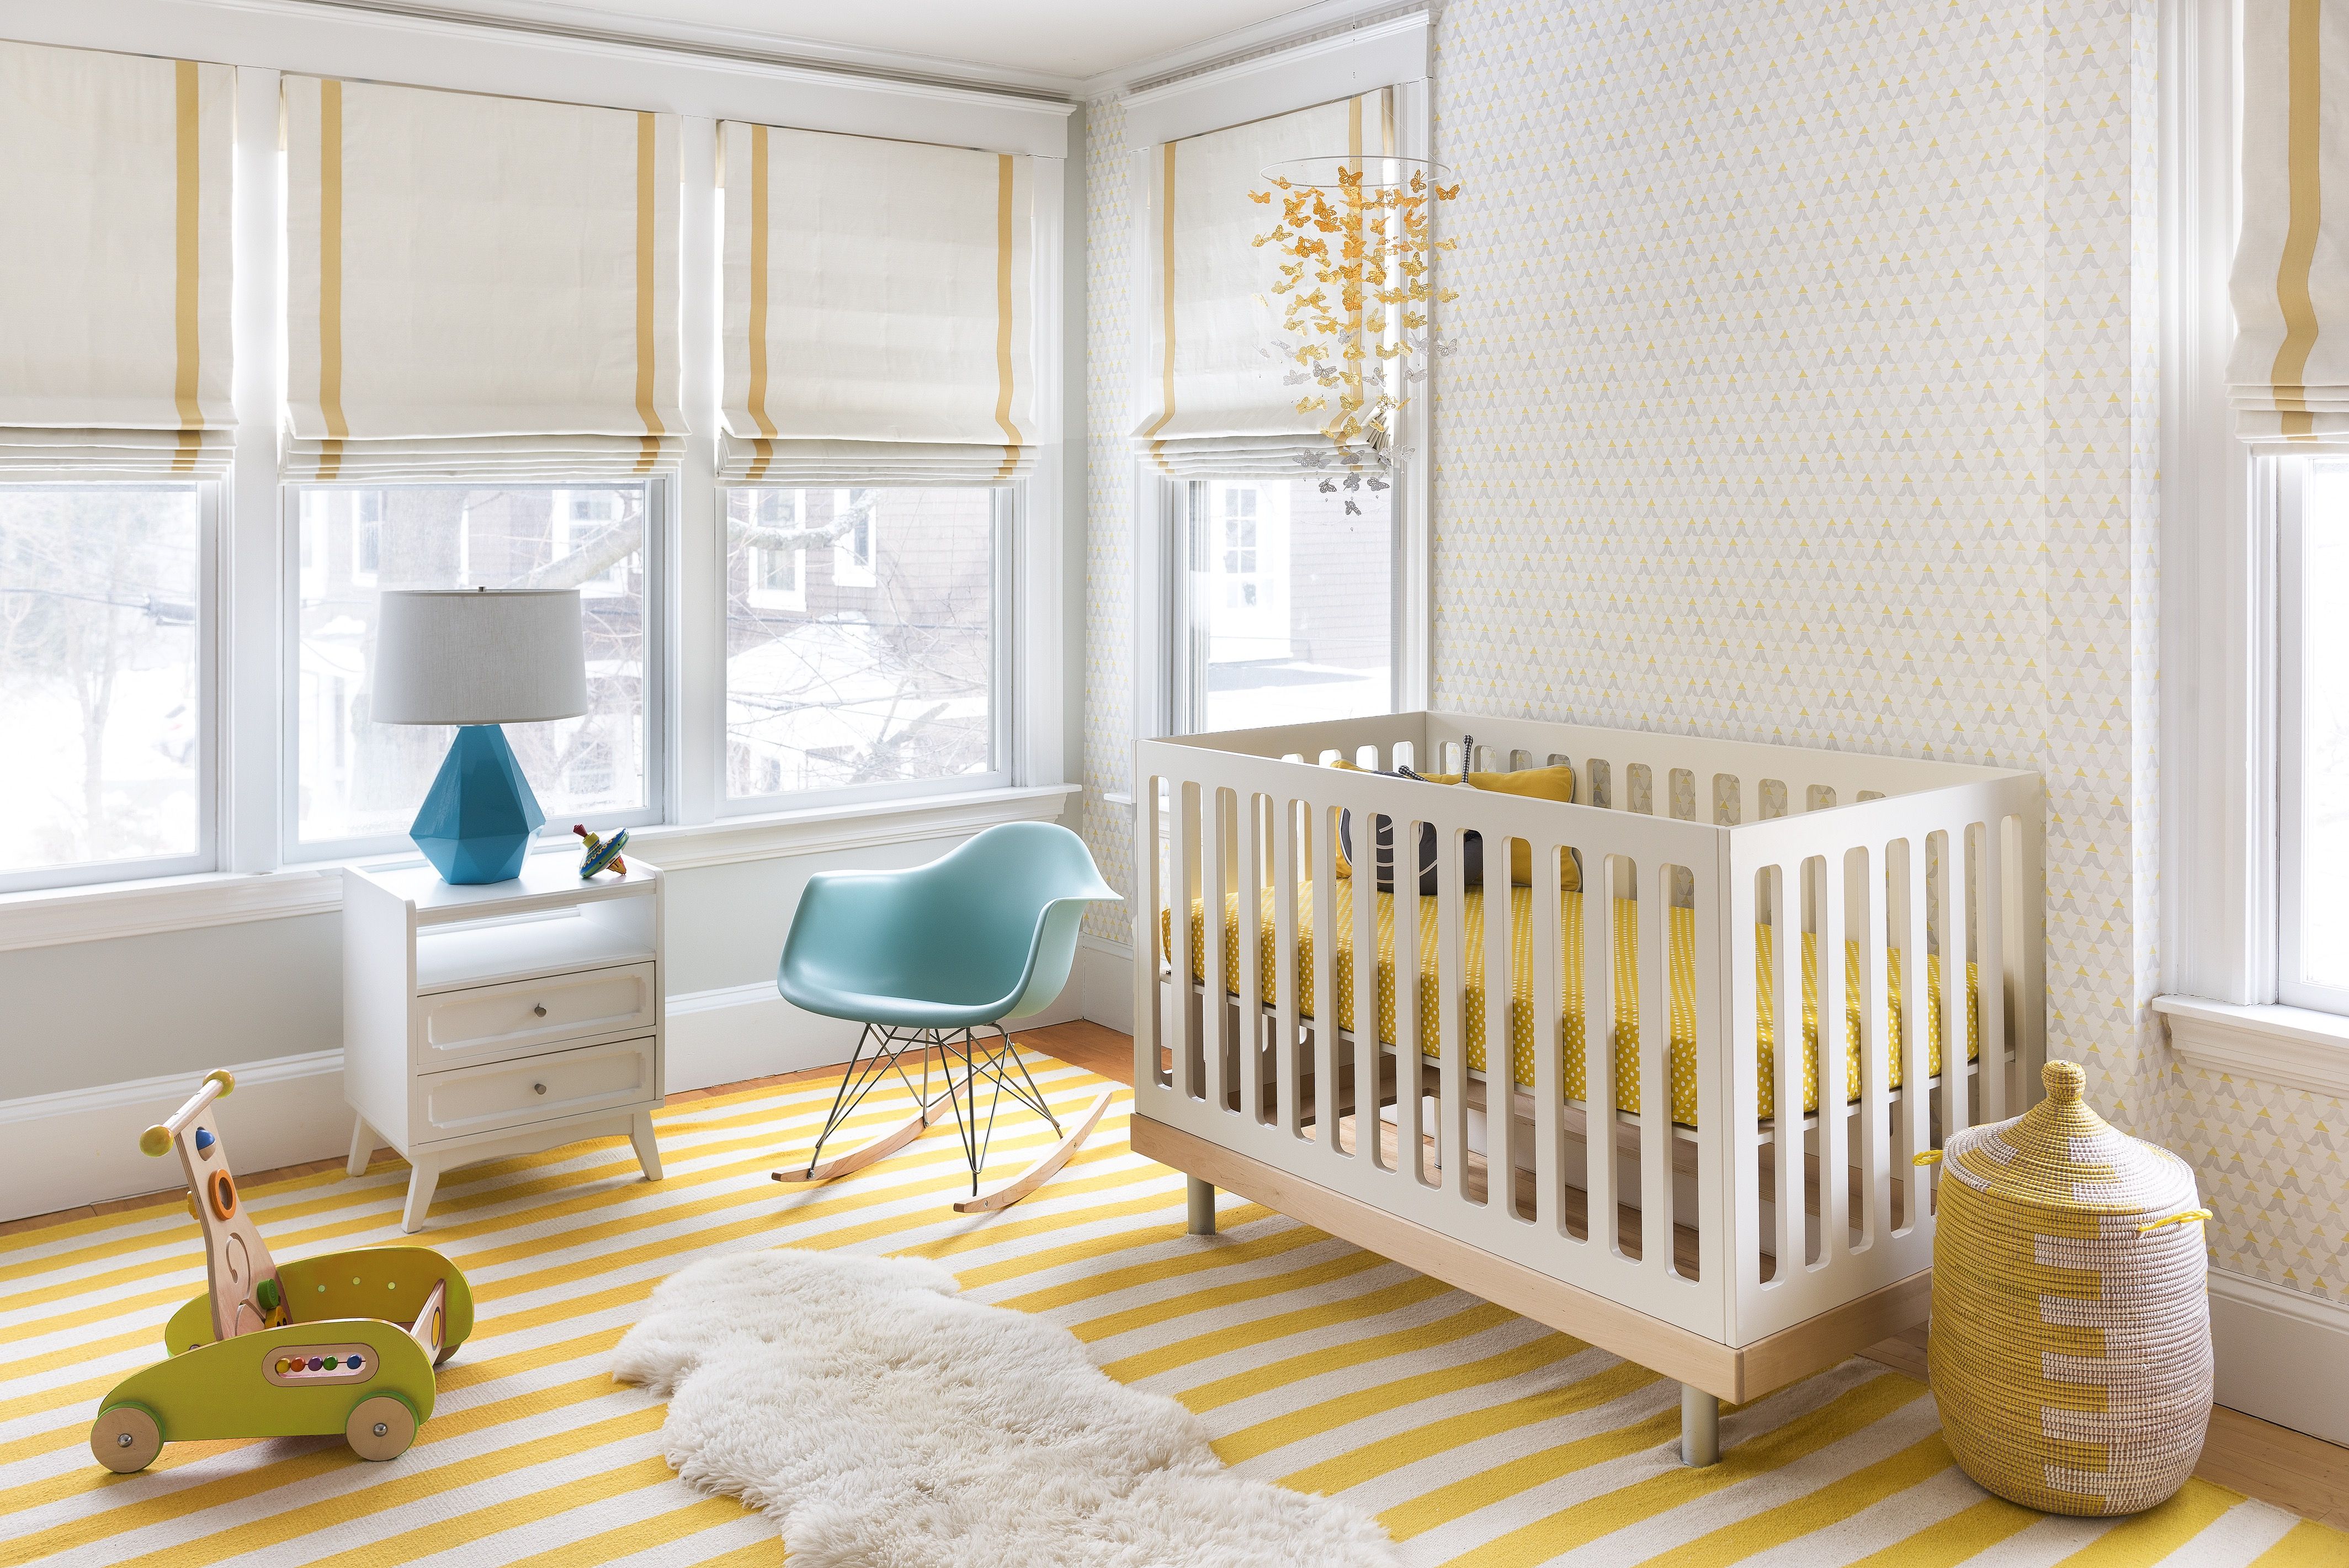 Modern Baby Room With Yellow Striped Rug And Eames Chair (View 17 of 33)